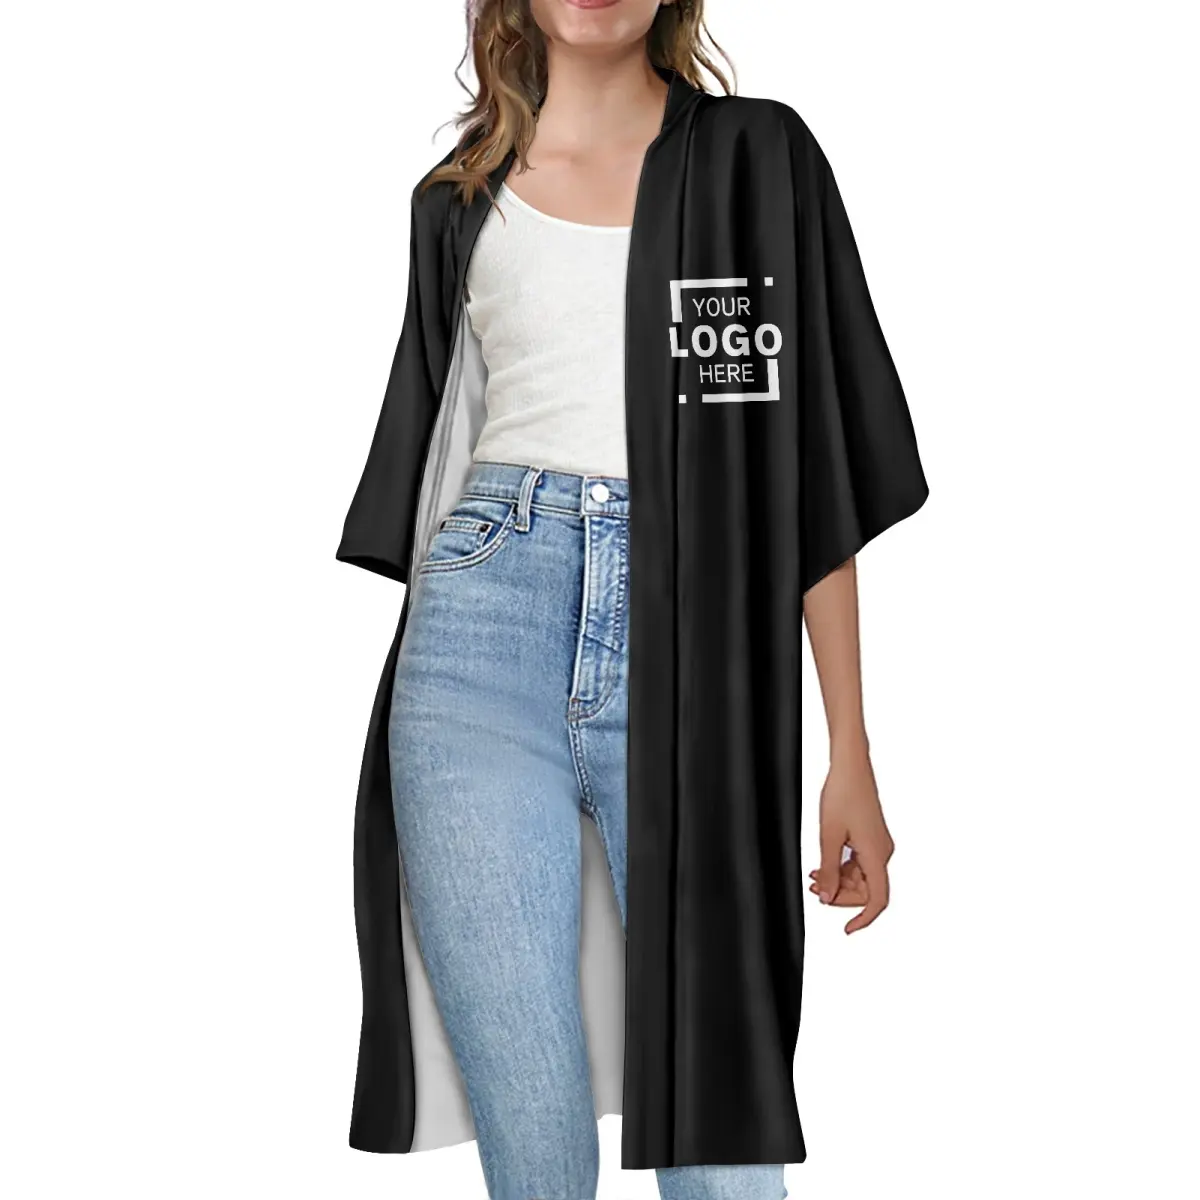 Hot Sale Women's Short-Sleeved Cloak Print On Demand Stylish Loose Cape Fits All Body Shapes And Worn With Jeans And Leggings